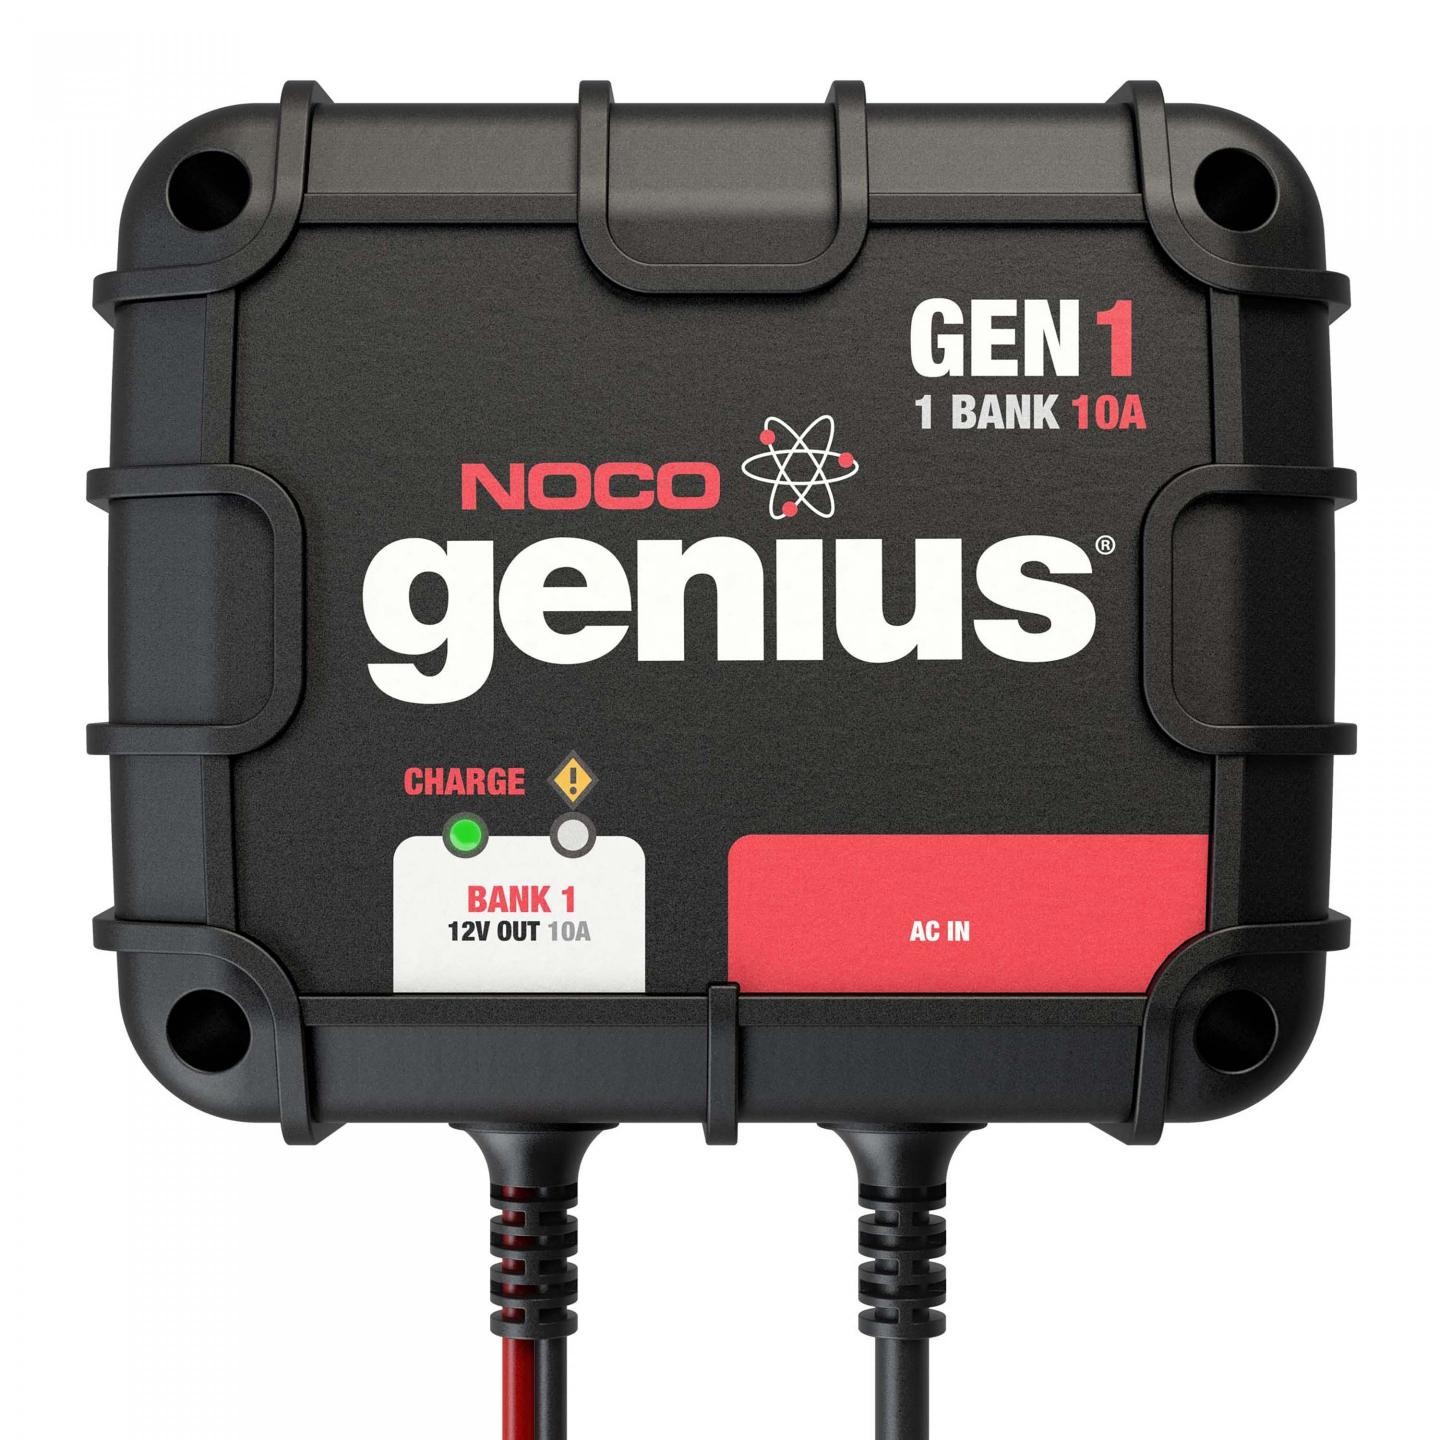 NOCO - 1-Bank 10A On-Board Battery Charger - GEN1